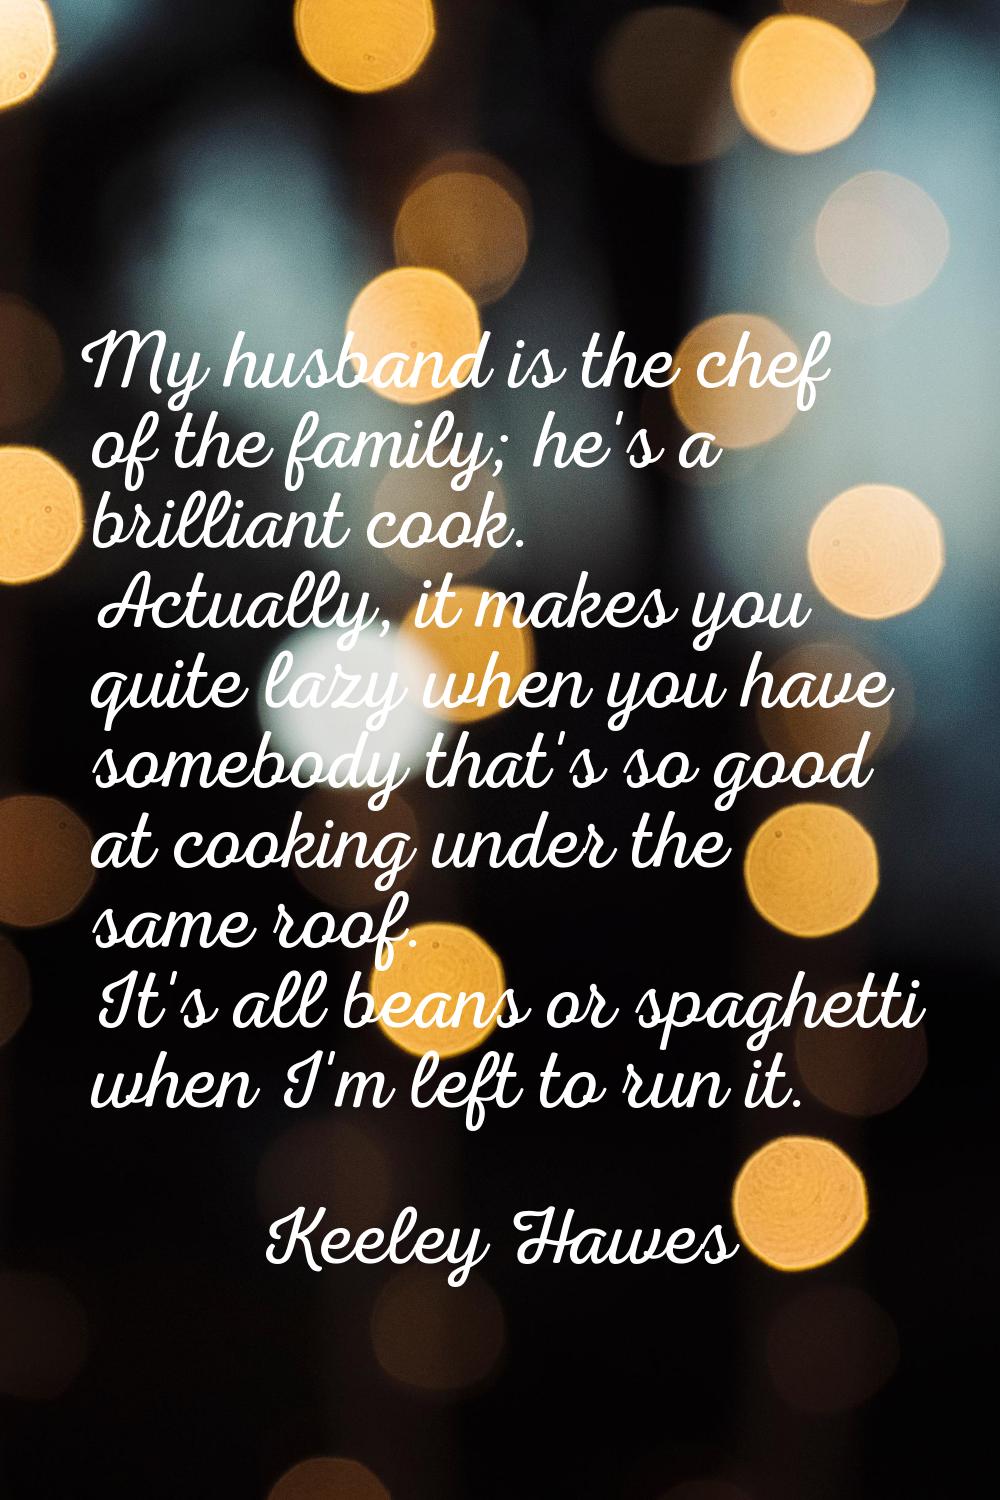 My husband is the chef of the family; he's a brilliant cook. Actually, it makes you quite lazy when